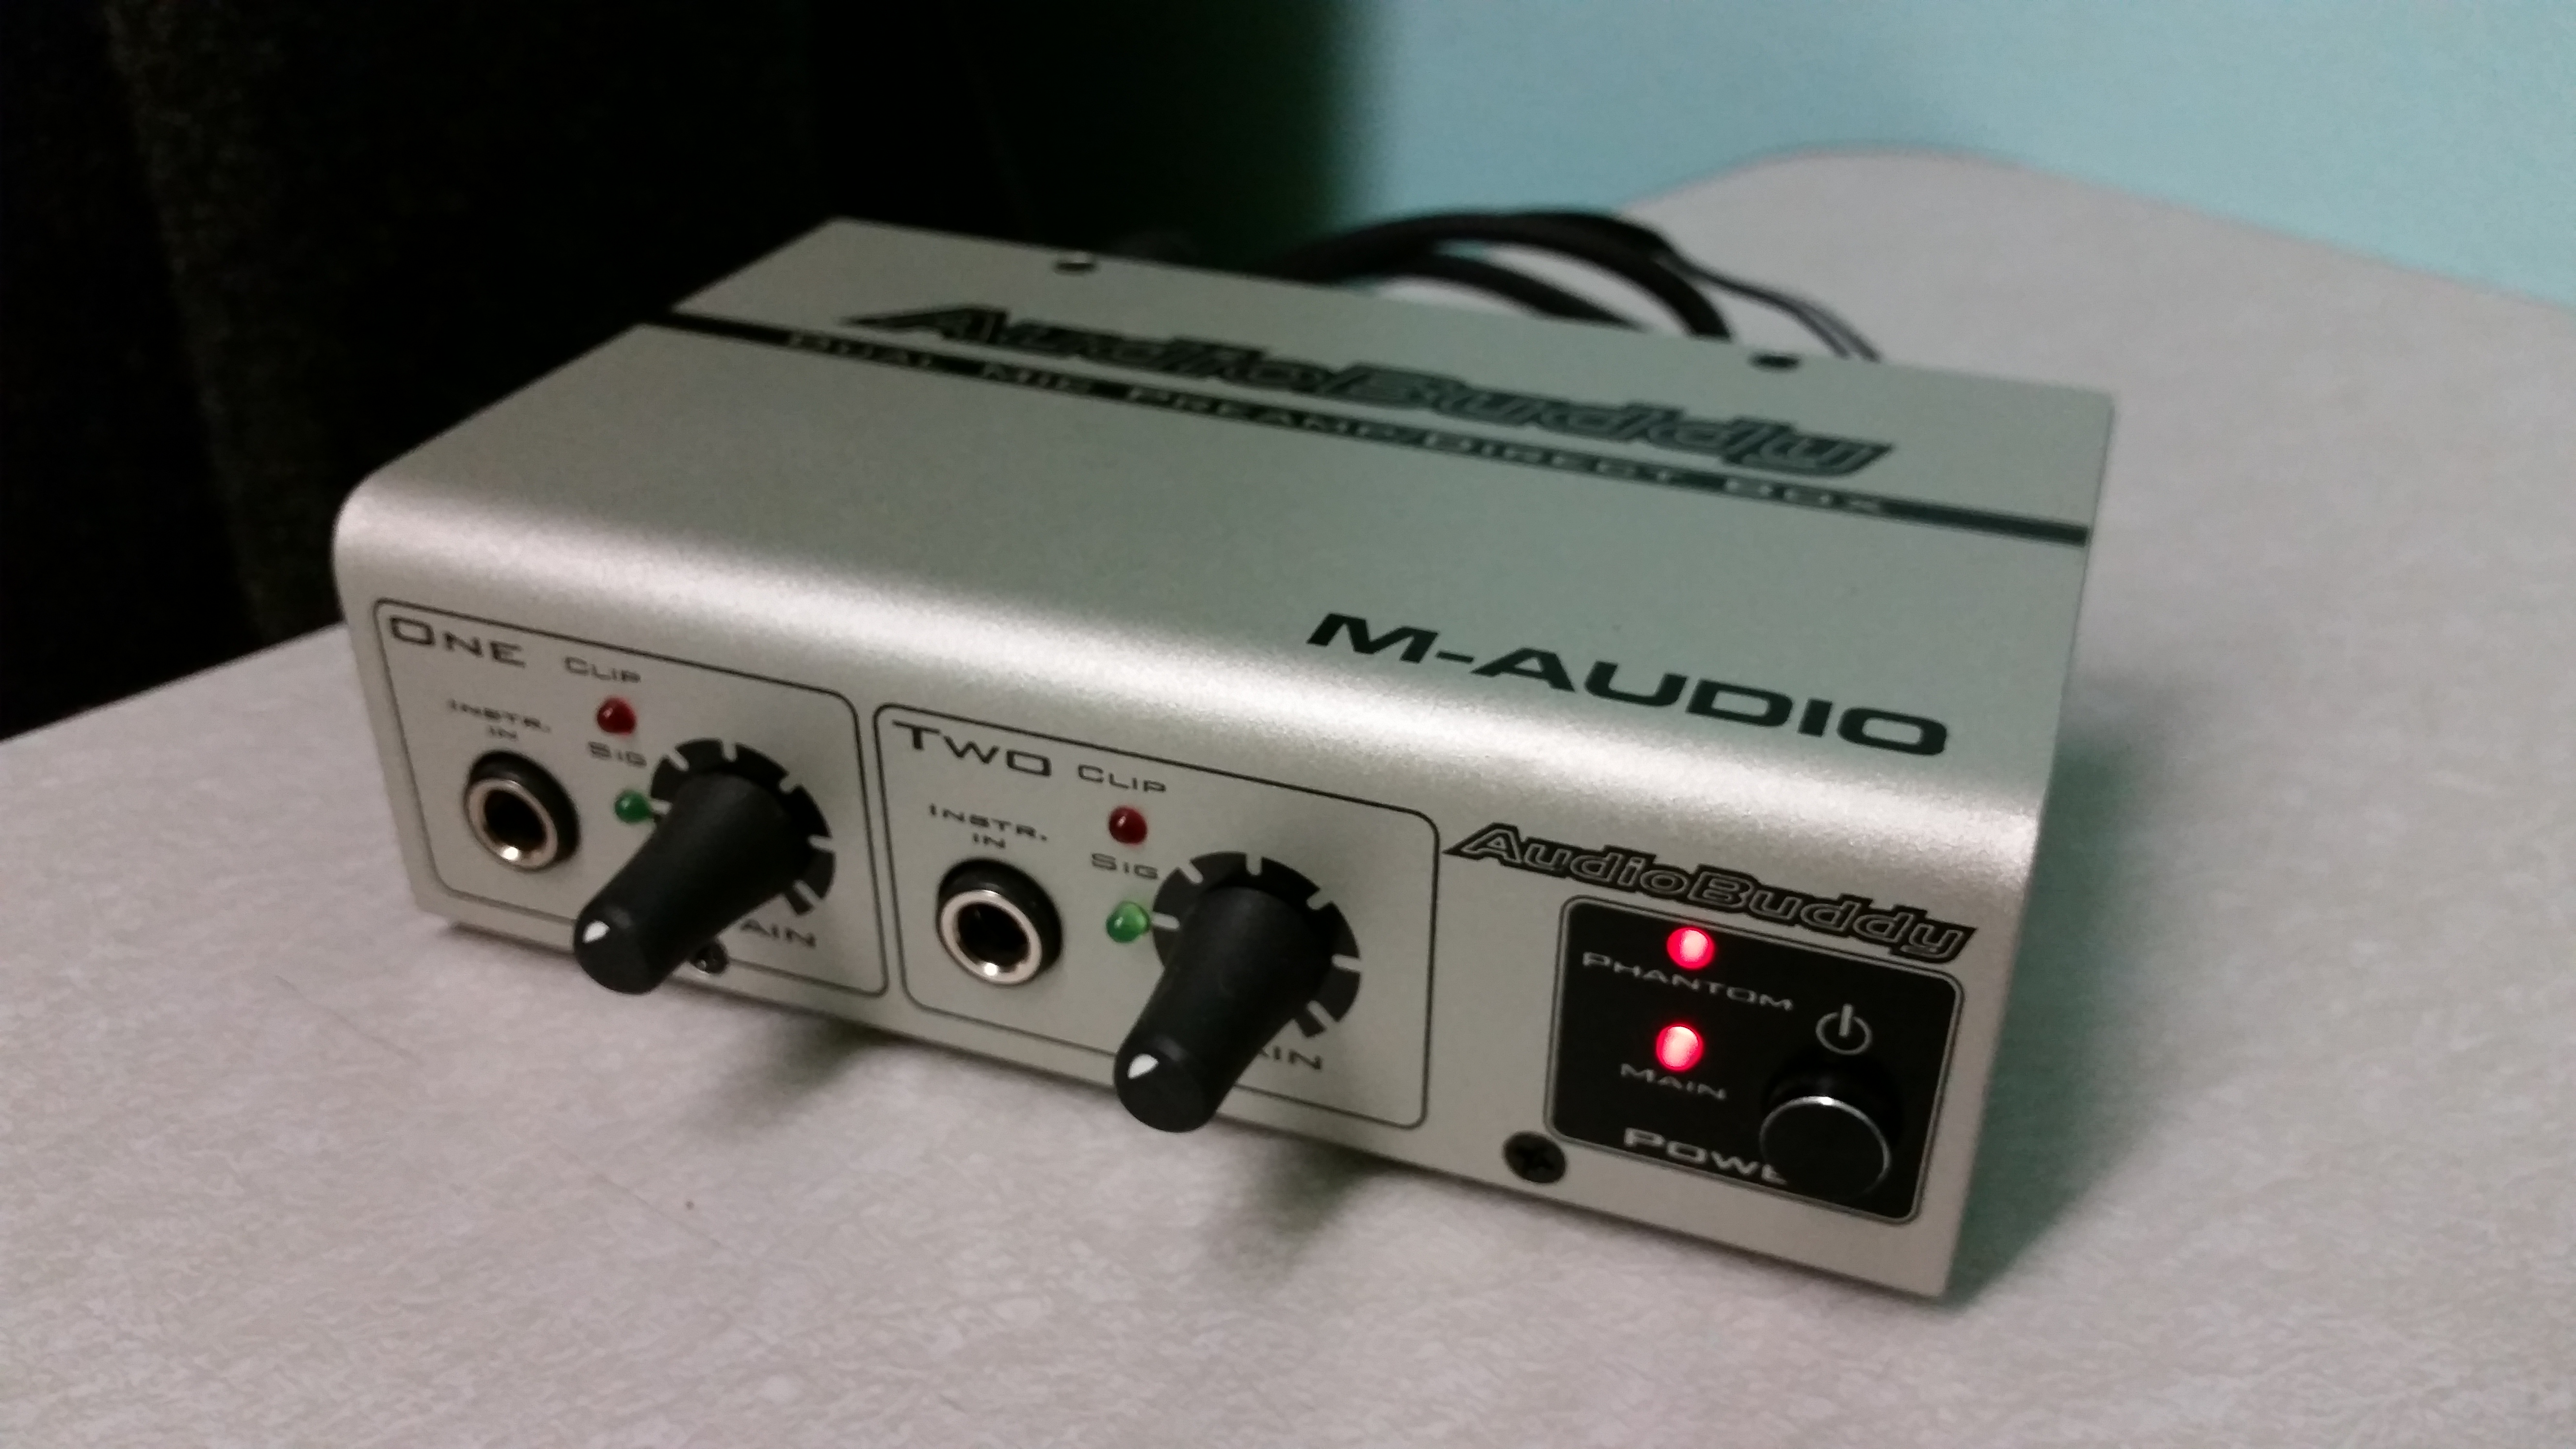 Audiobuddy will only record if both power lights are on.